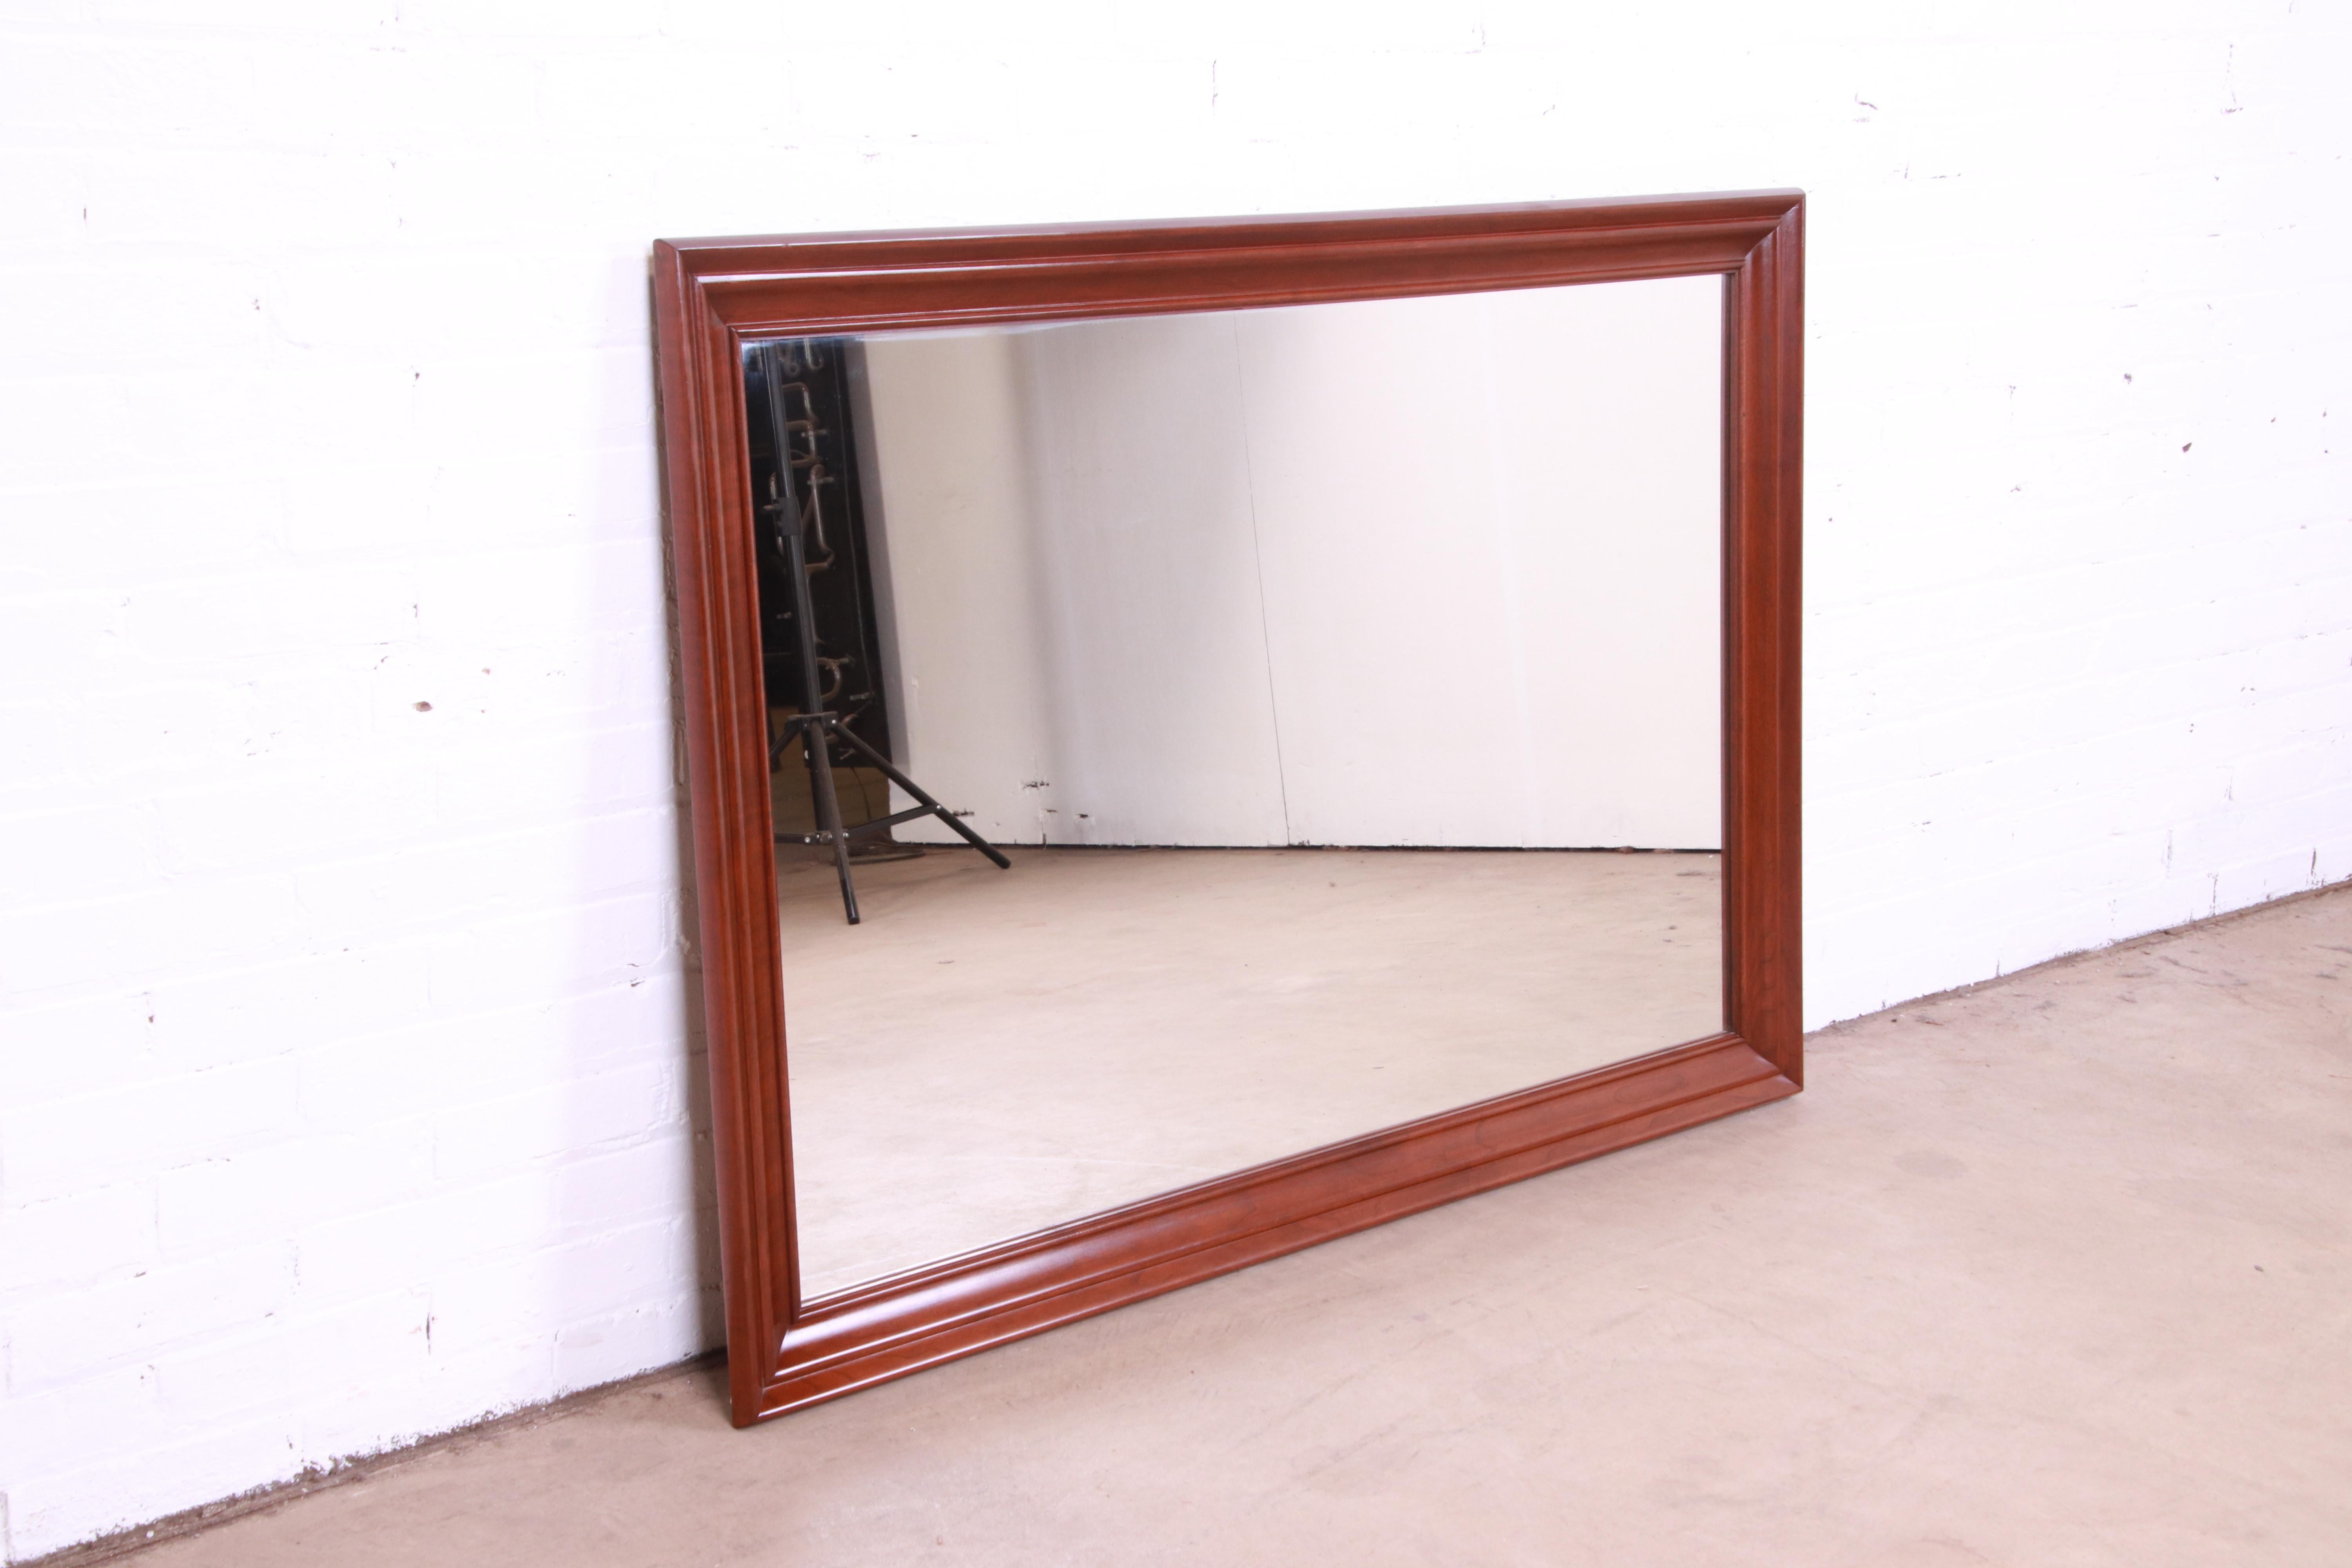 A gorgeous American Colonial solid cherry wood framed wall mirror

By Ethan Allen, 